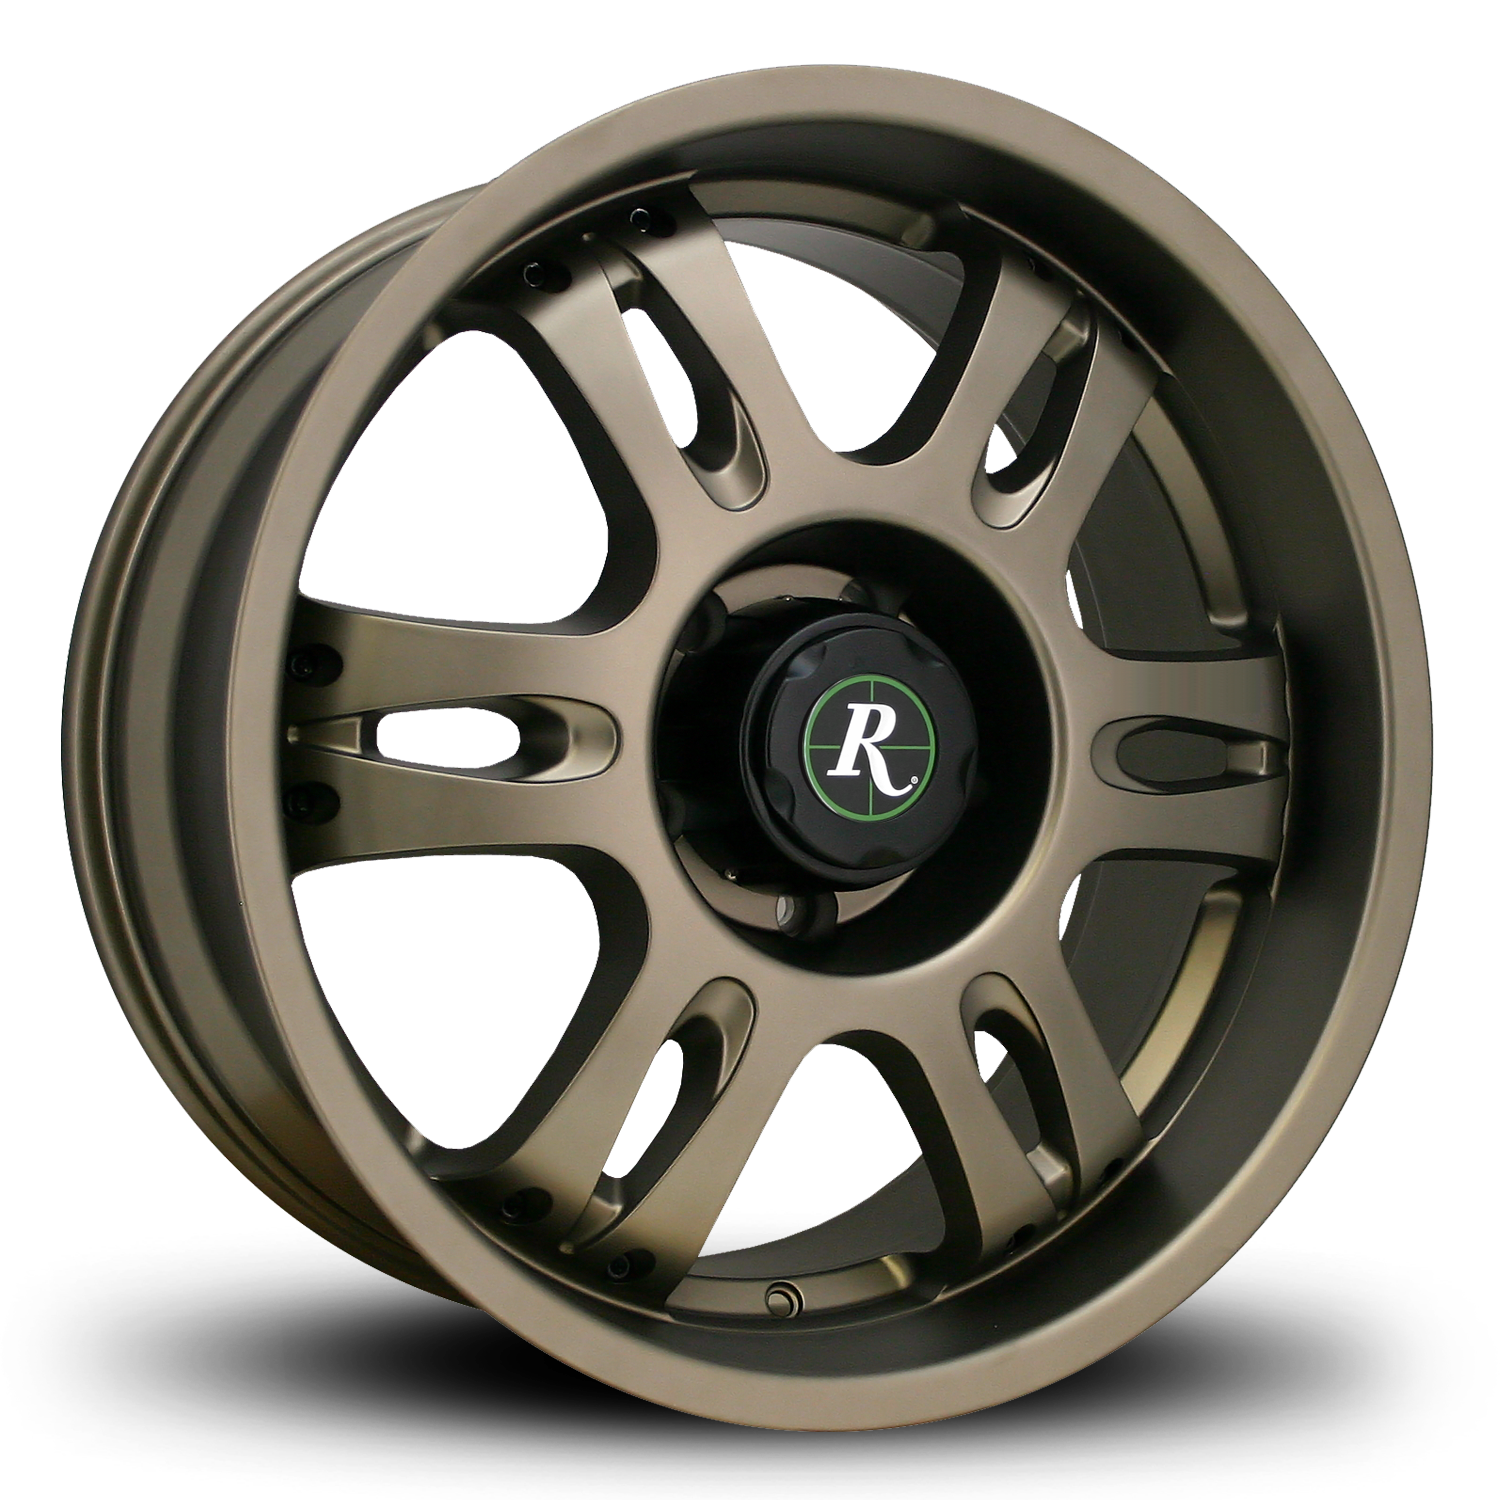 Buy Replacement Center Caps for the Remingotn Trophy Wheel Rims